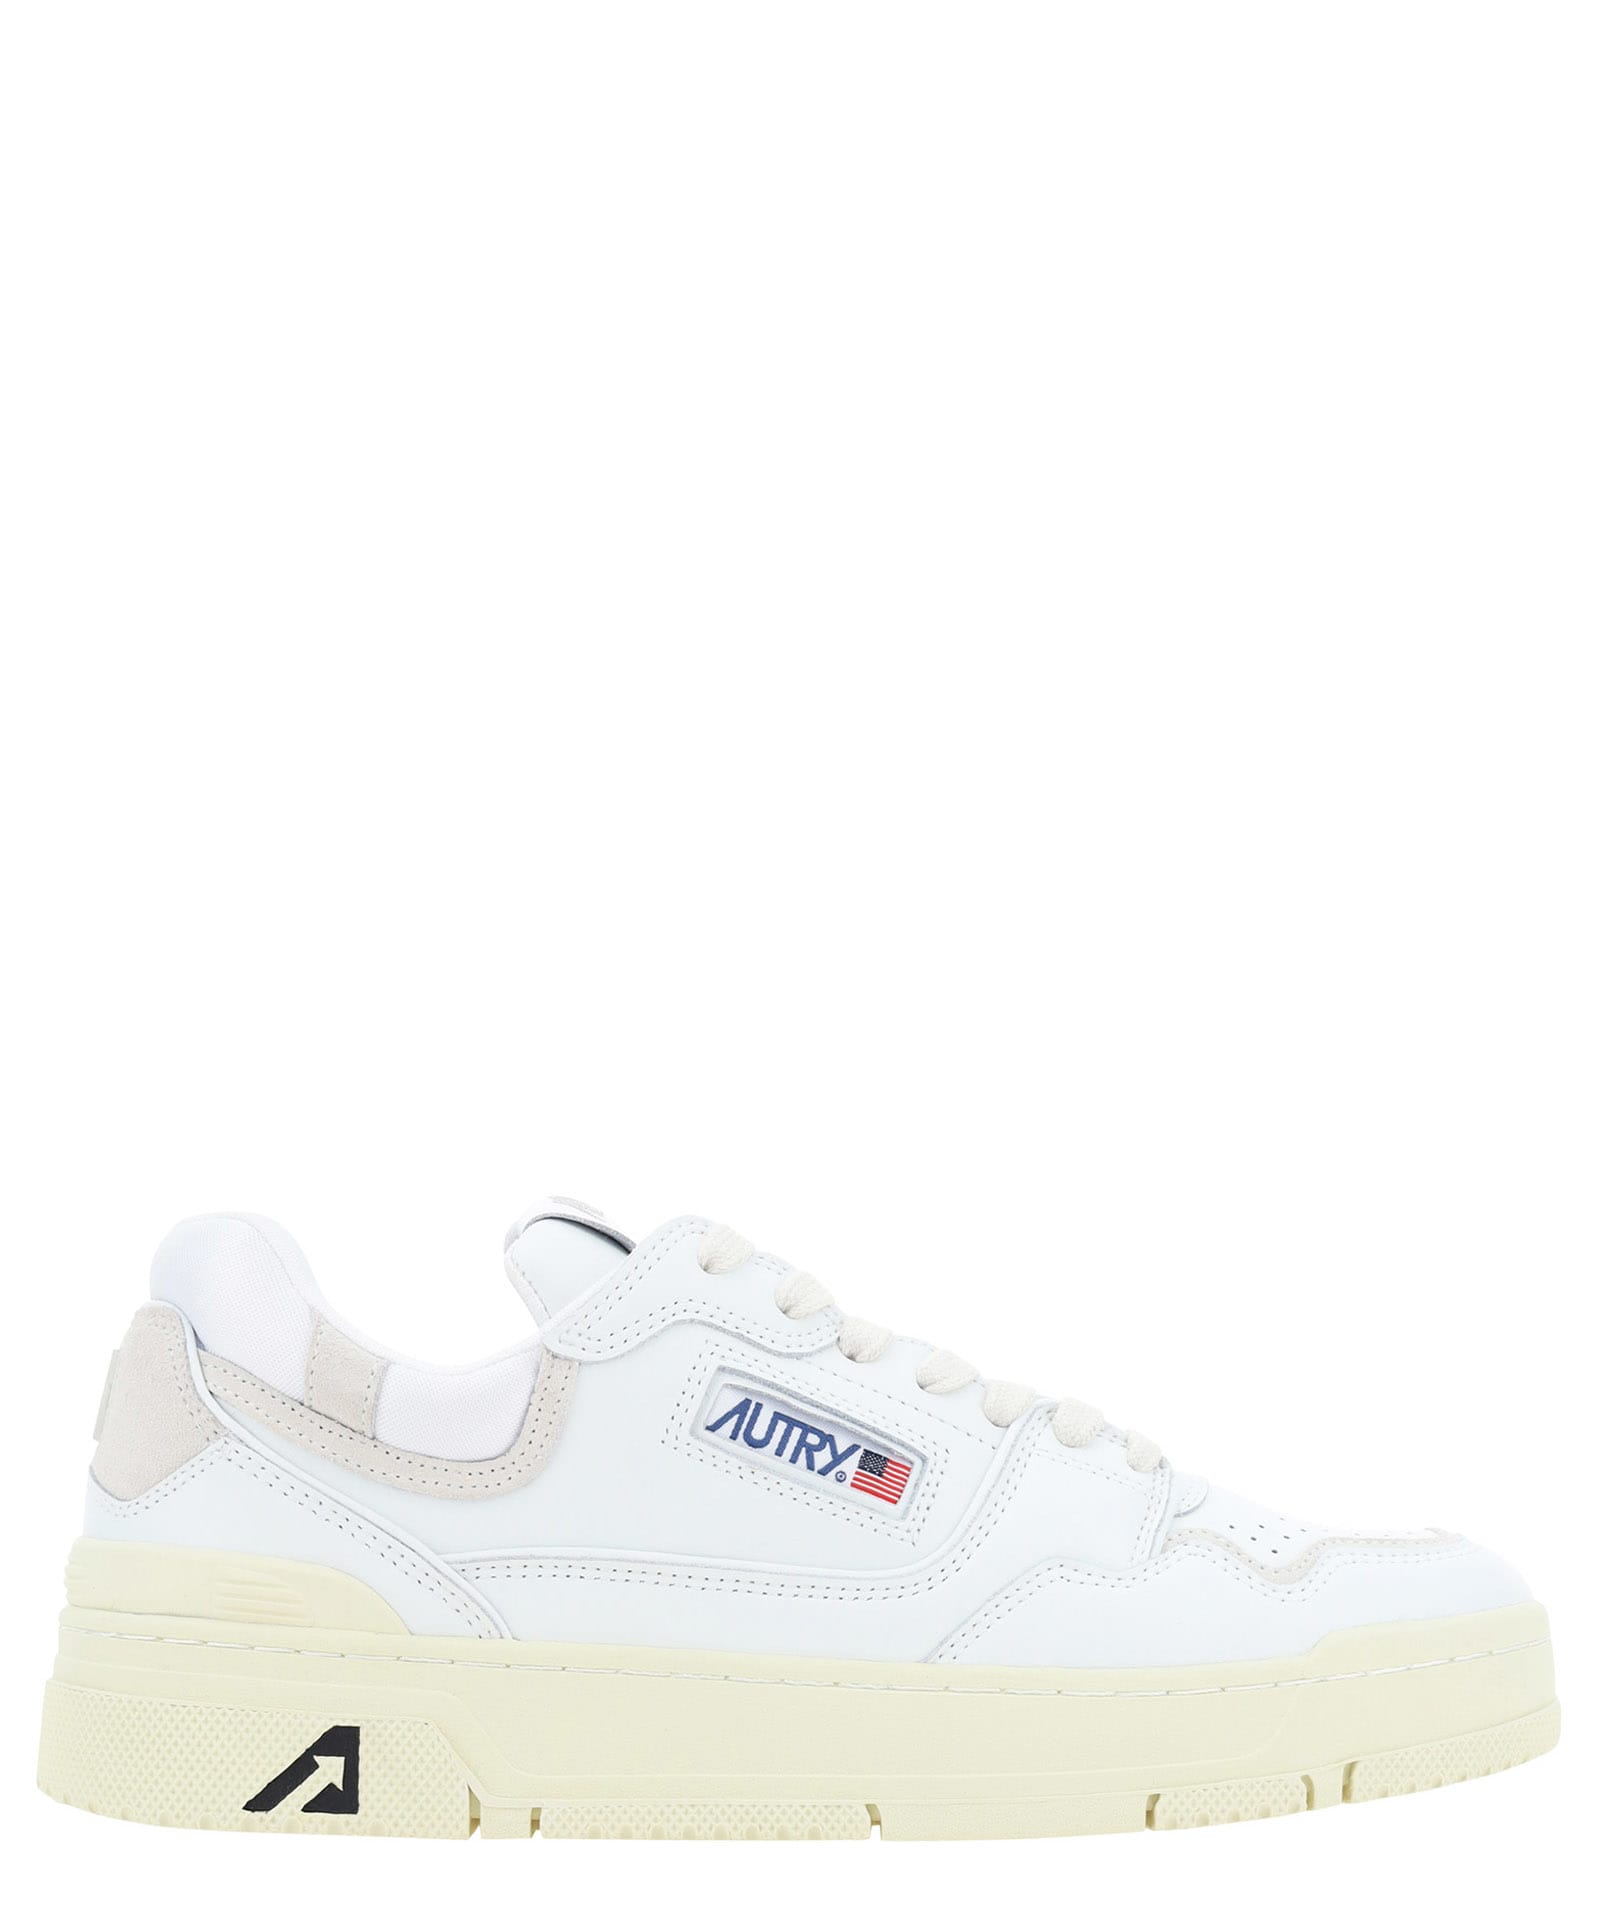 Shop Autry Clc Low Leather Sneakers